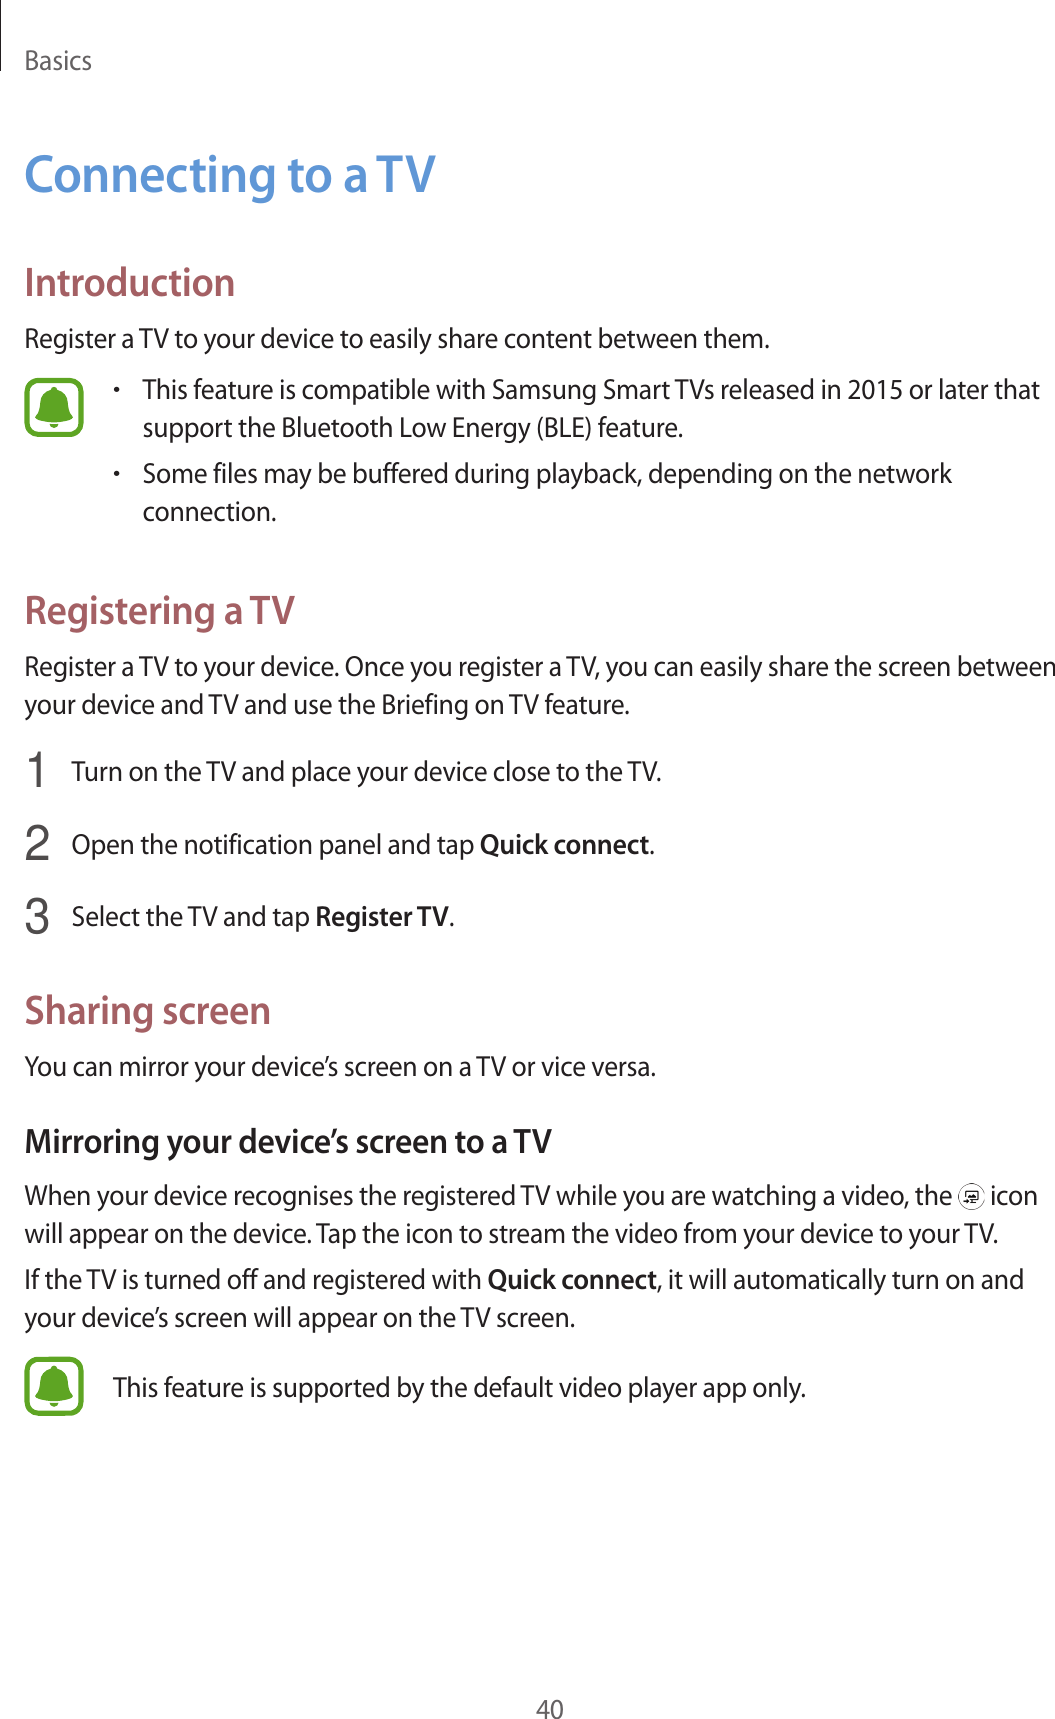 Basics40Connecting to a TVIntroductionRegister a TV to your device to easily share content between them.•This feature is compatible with Samsung Smart TVs released in 2015 or later that support the Bluetooth Low Energy (BLE) feature.•Some files may be buffered during playback, depending on the network connection.Registering a TVRegister a TV to your device. Once you register a TV, you can easily share the screen between your device and TV and use the Briefing on TV feature.1  Turn on the TV and place your device close to the TV.2  Open the notification panel and tap Quick connect.3  Select the TV and tap Register TV.Sharing screenYou can mirror your device’s screen on a TV or vice versa.Mirroring your device’s screen to a TVWhen your device recognises the registered TV while you are watching a video, the   icon will appear on the device. Tap the icon to stream the video from your device to your TV.If the TV is turned off and registered with Quick connect, it will automatically turn on and your device’s screen will appear on the TV screen.This feature is supported by the default video player app only.